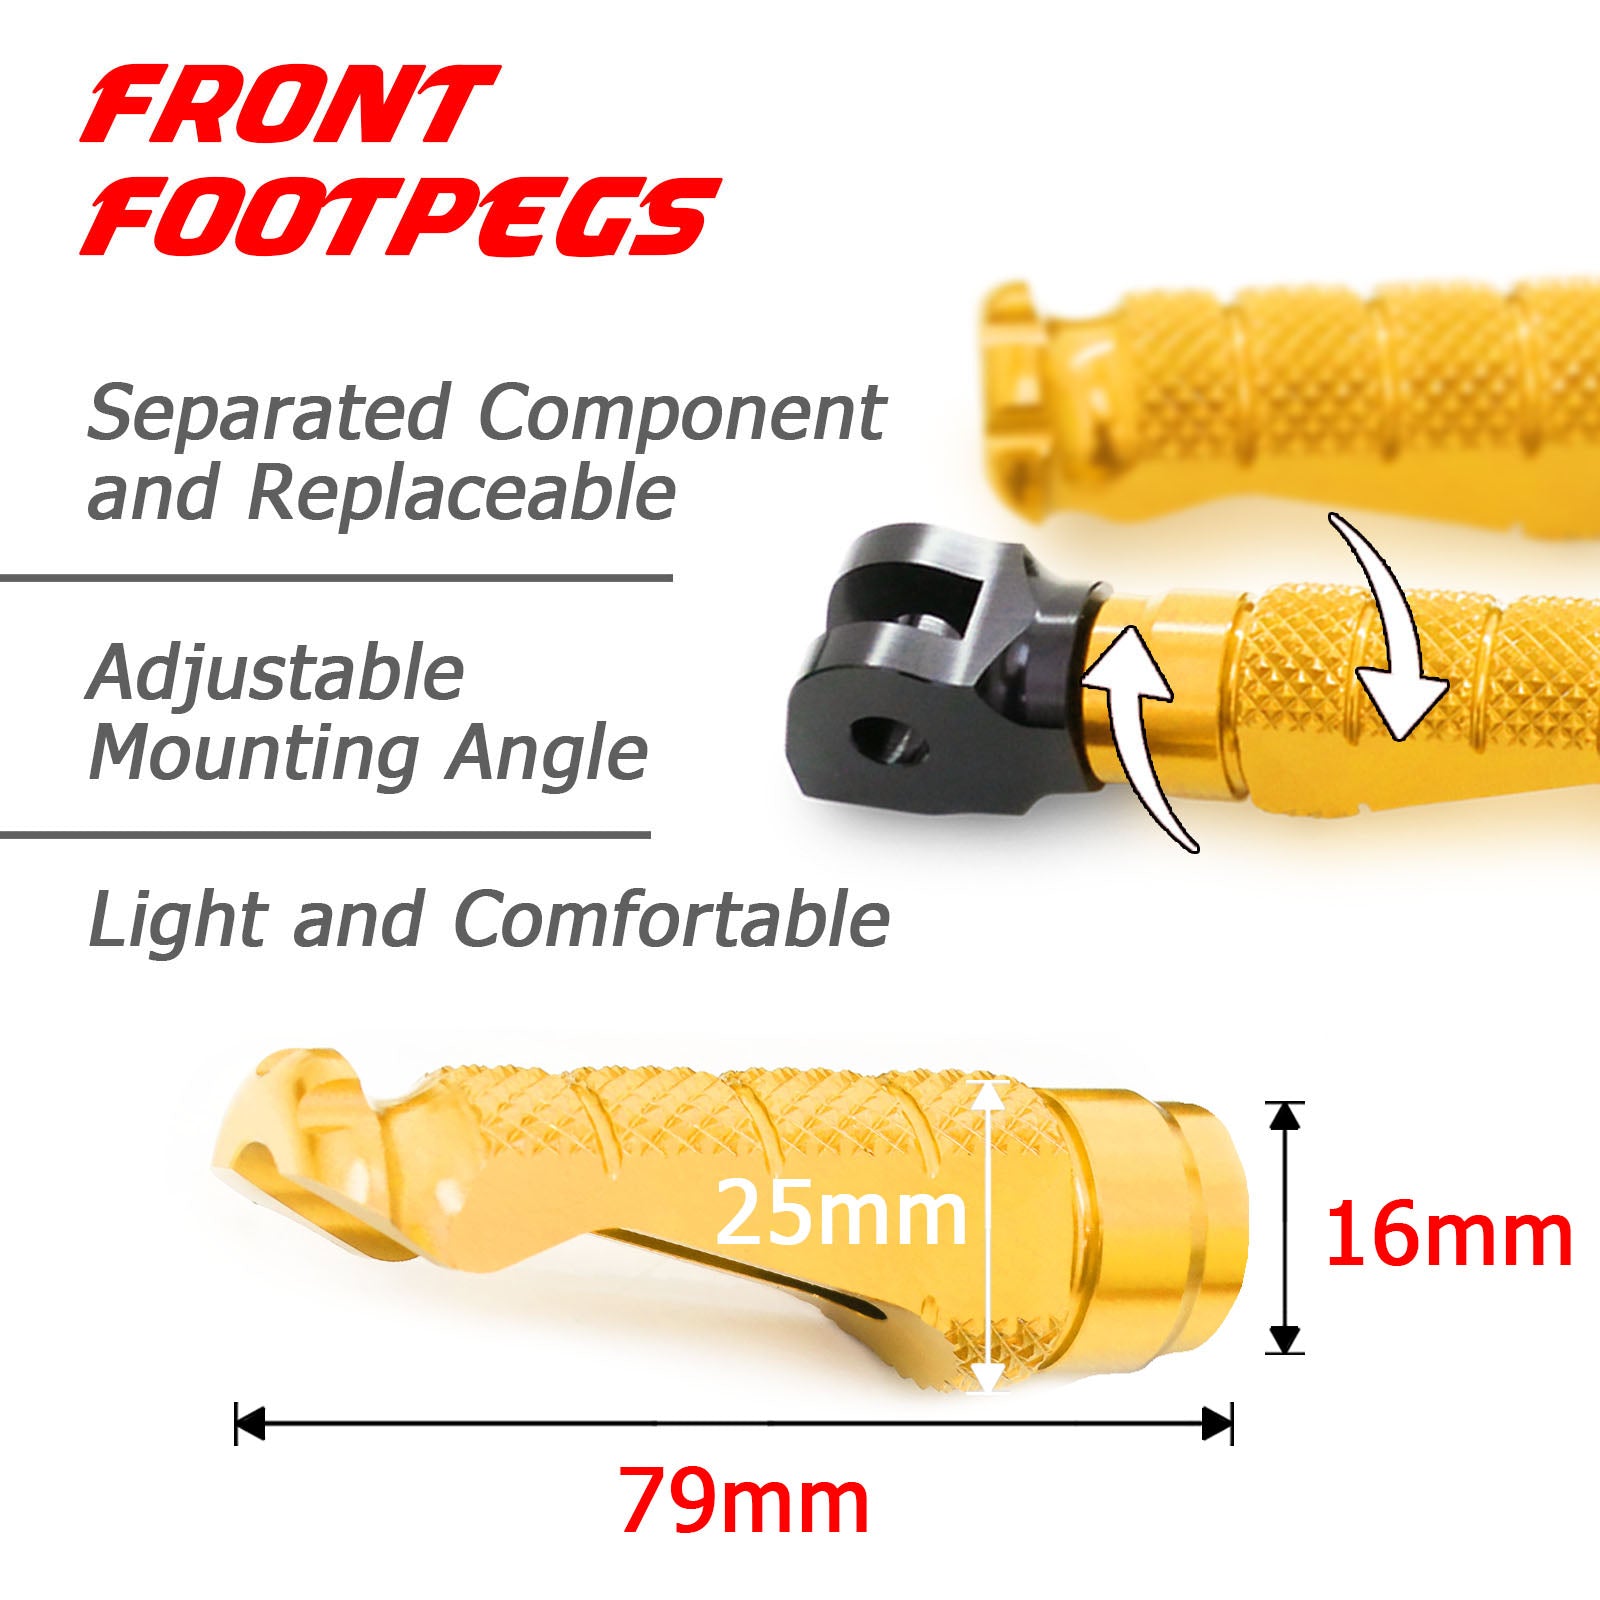 BMW K1300R engraved front rider Gold Foot Pegs